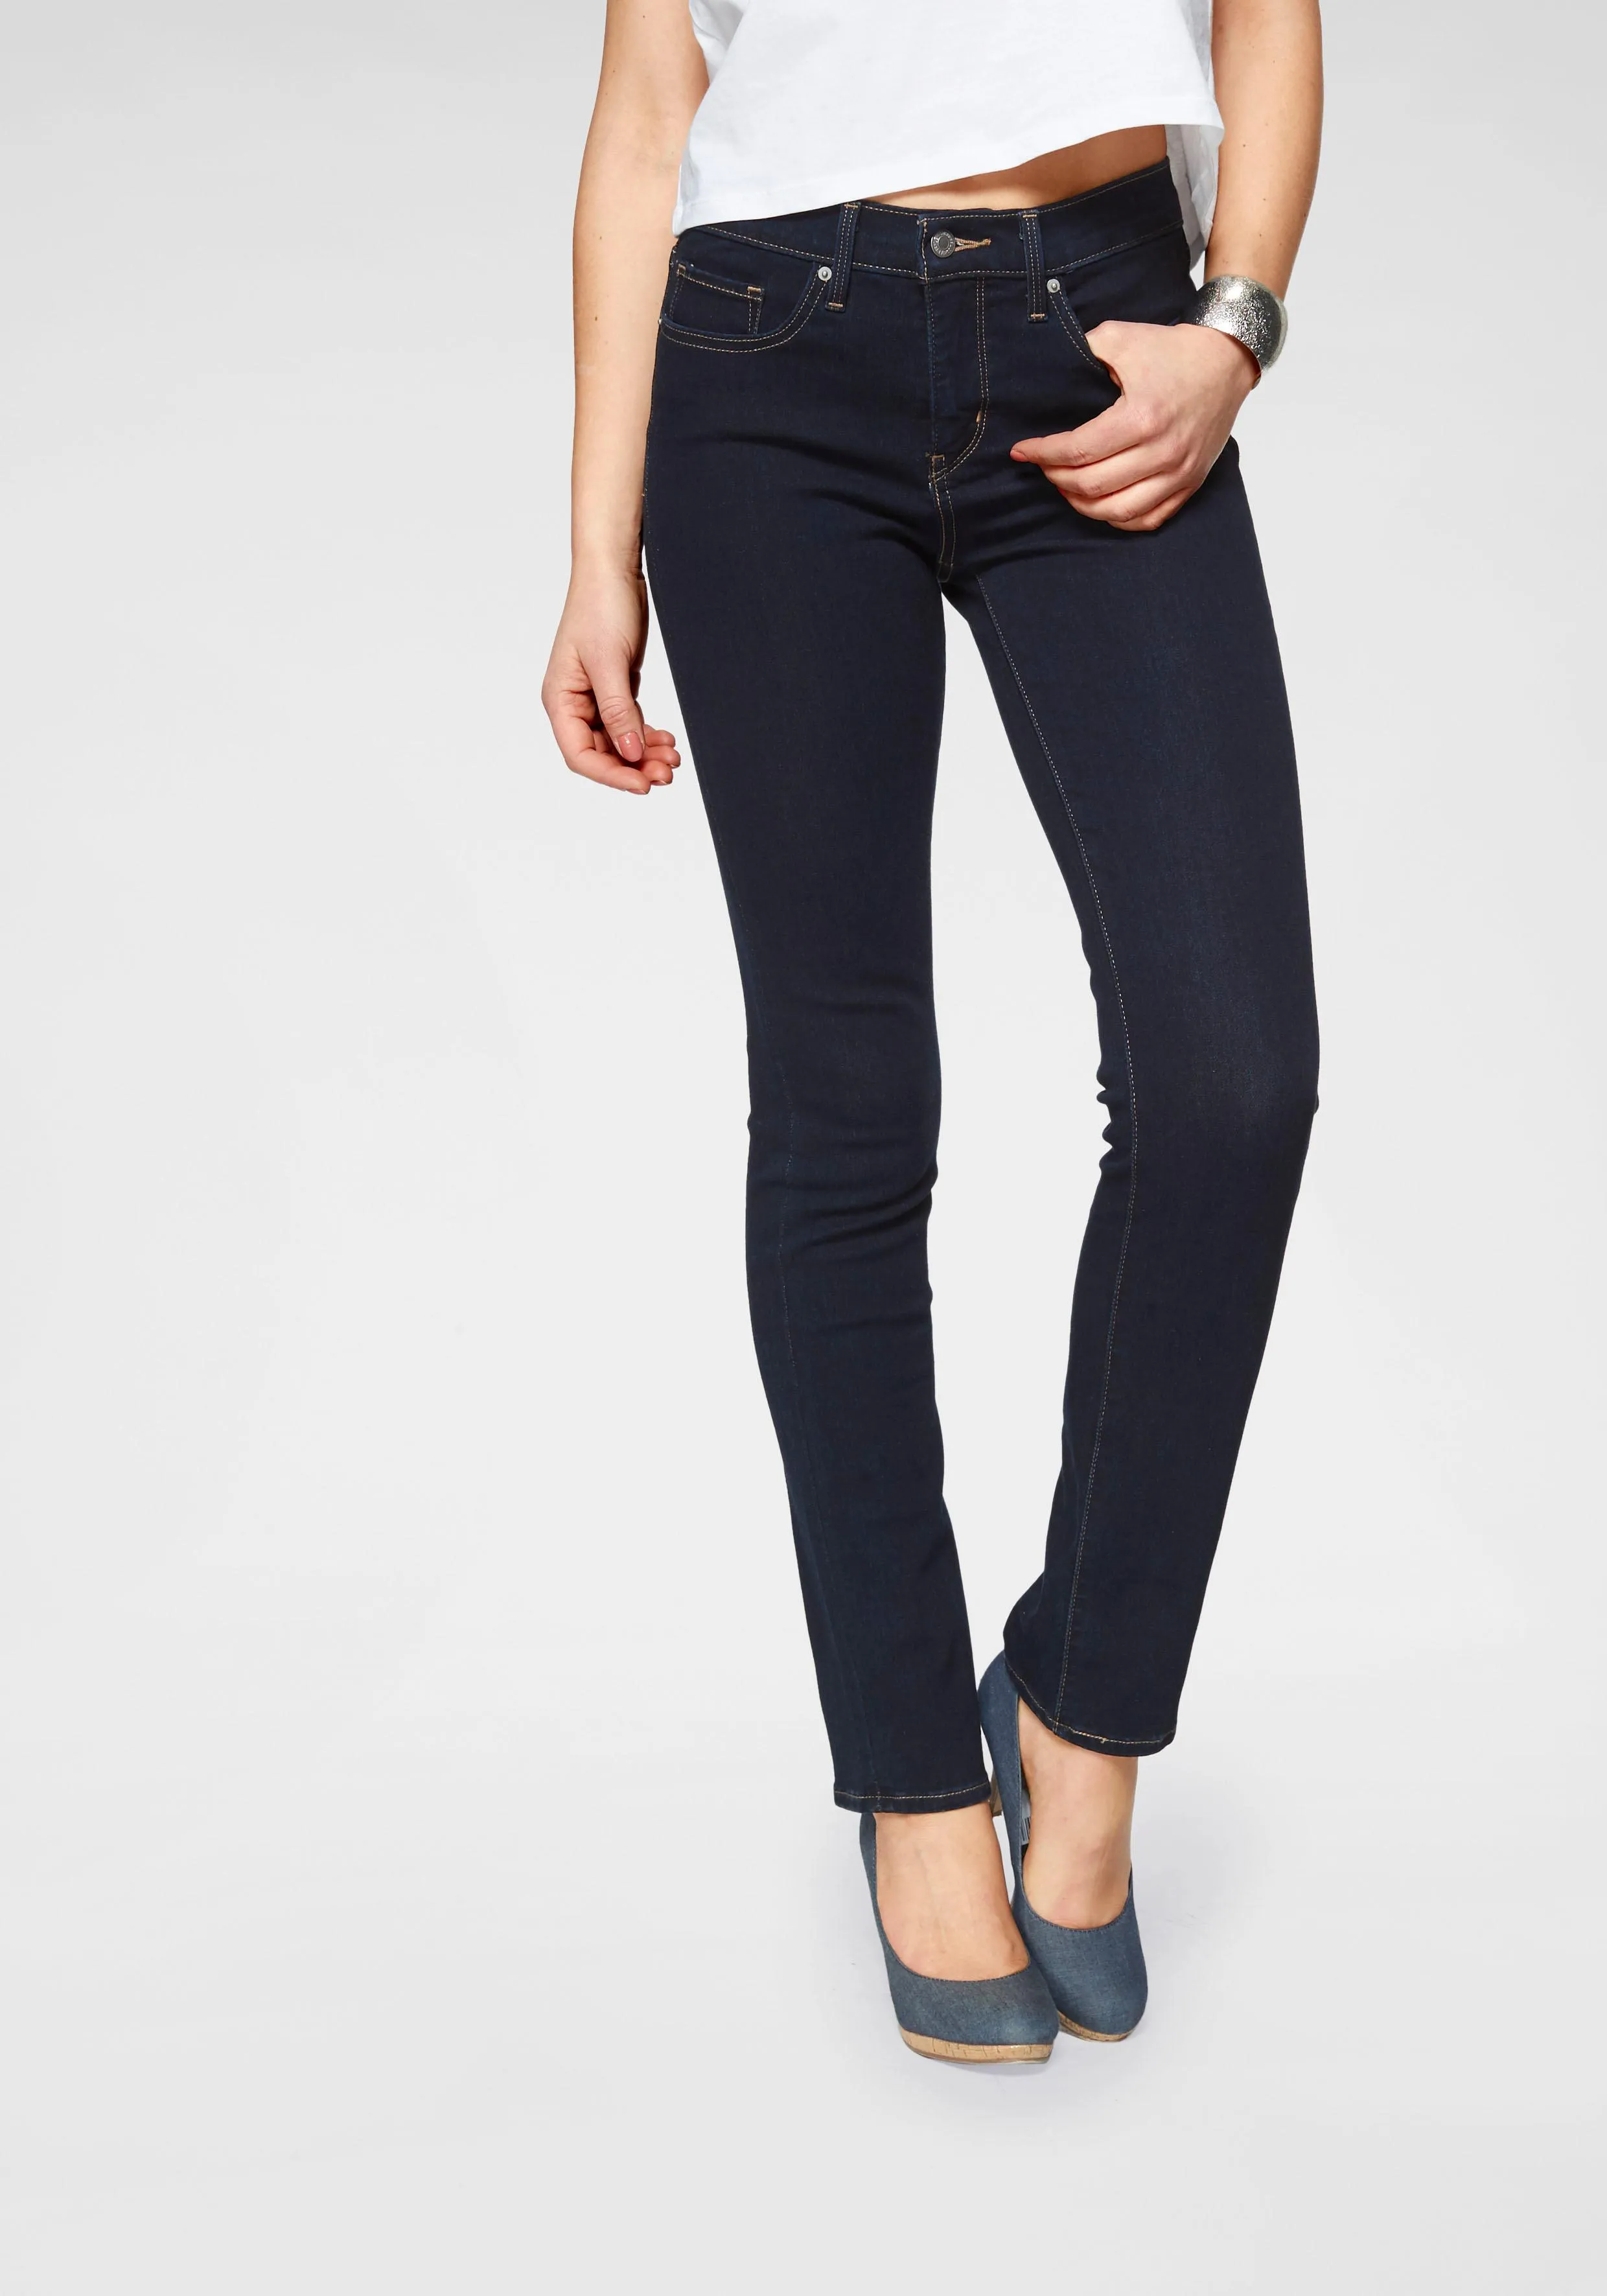 Levi's® Röhrenjeans »312 Shaping Slim«, Schmale Shaping Slim Form Levi's® rinsed 31